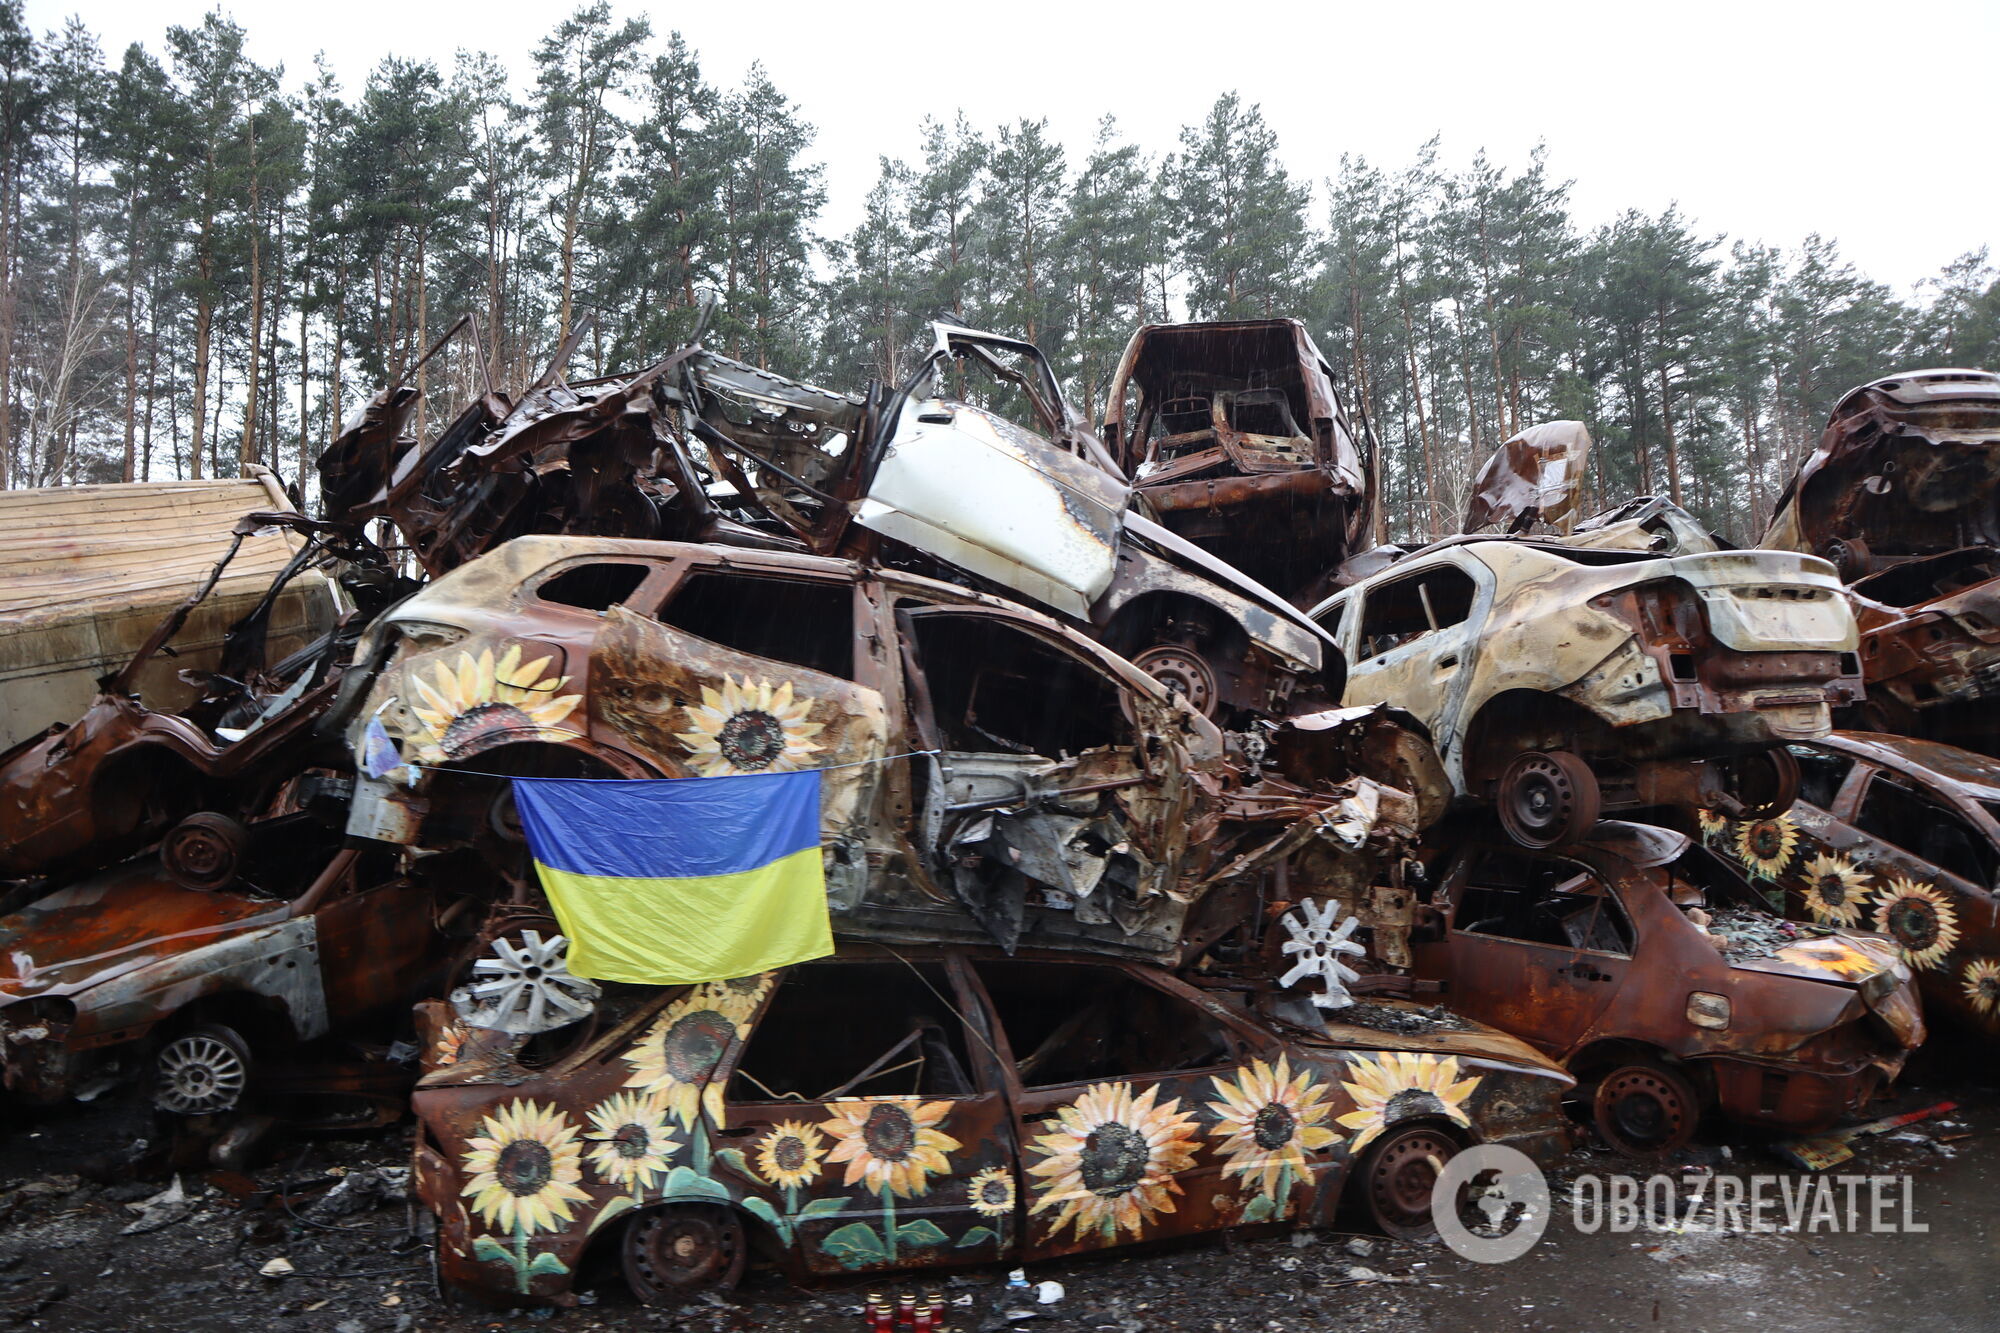 A dump of war-damaged cars in Irpin, March 23.